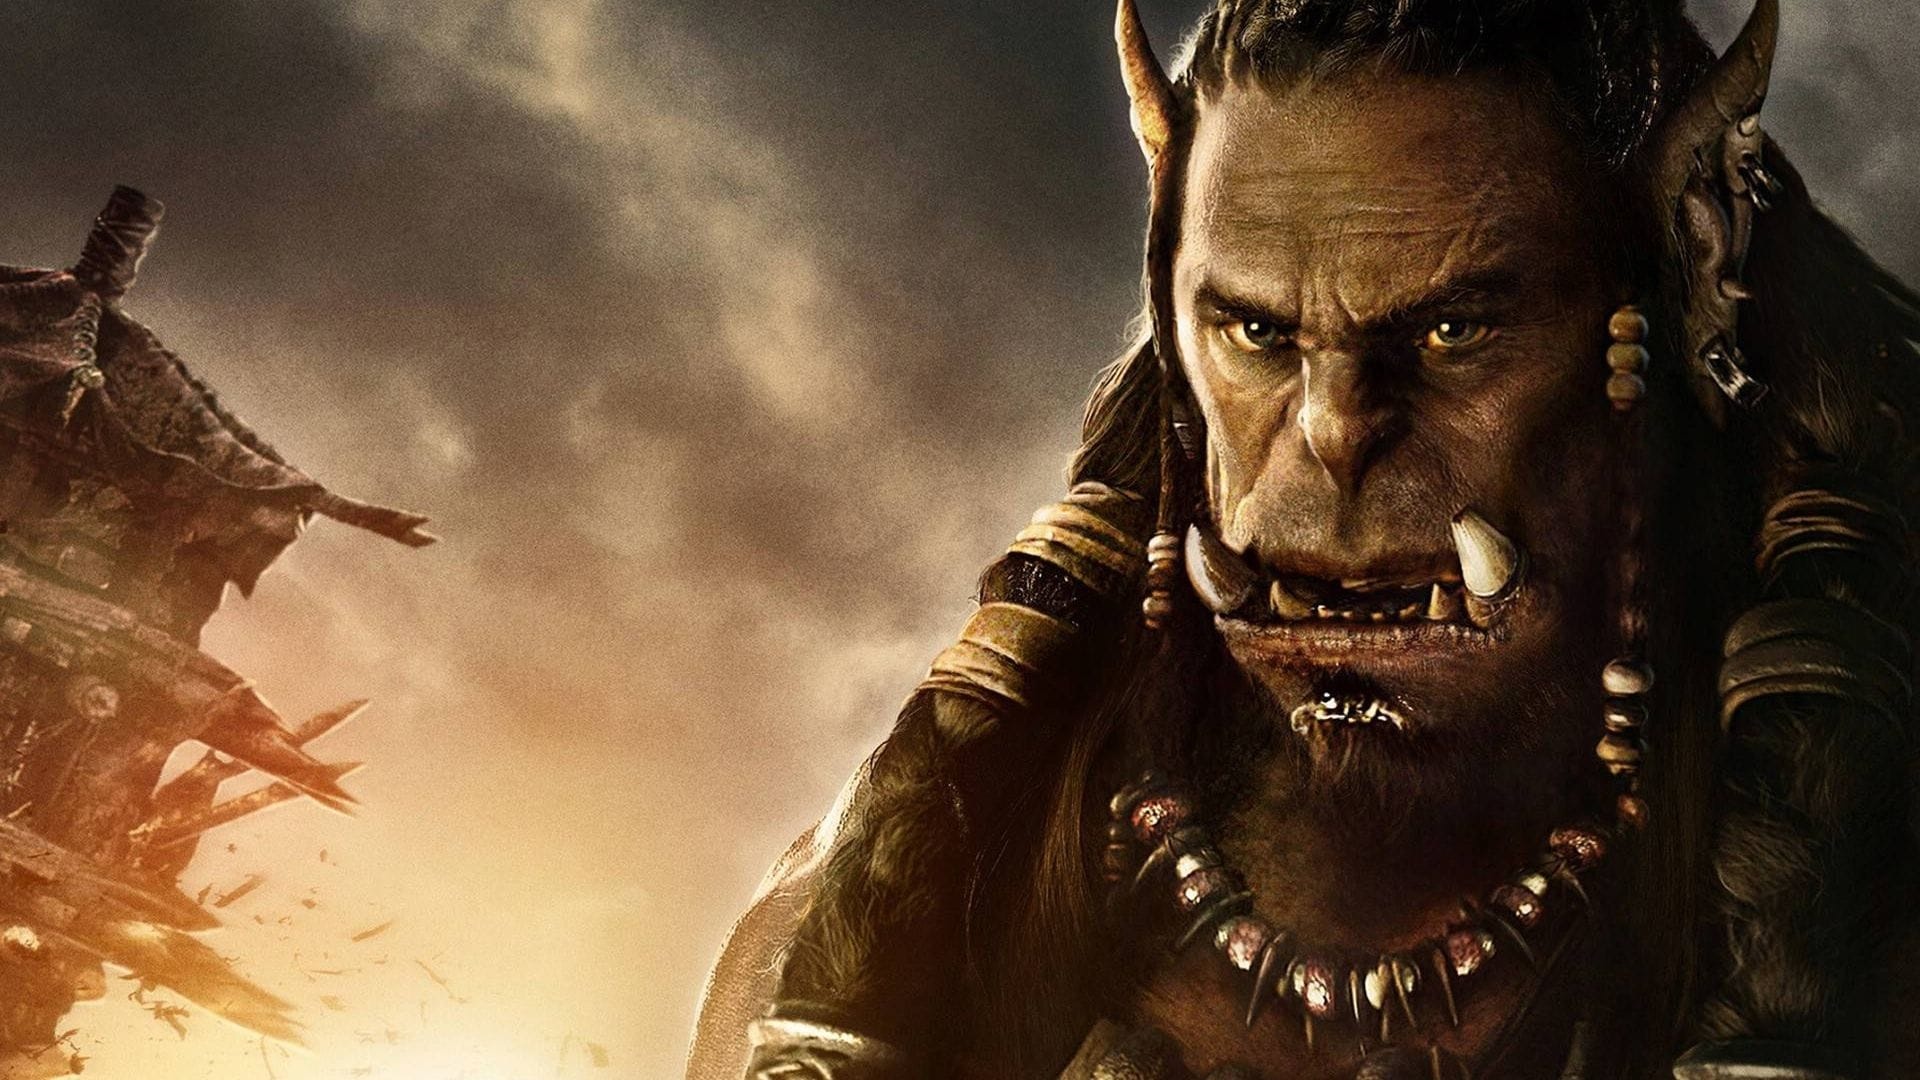 Warcraft (Movie): Toby Kebbell plays Durotan, the noble leader of the Frostwolf clan. 1920x1080 Full HD Wallpaper.